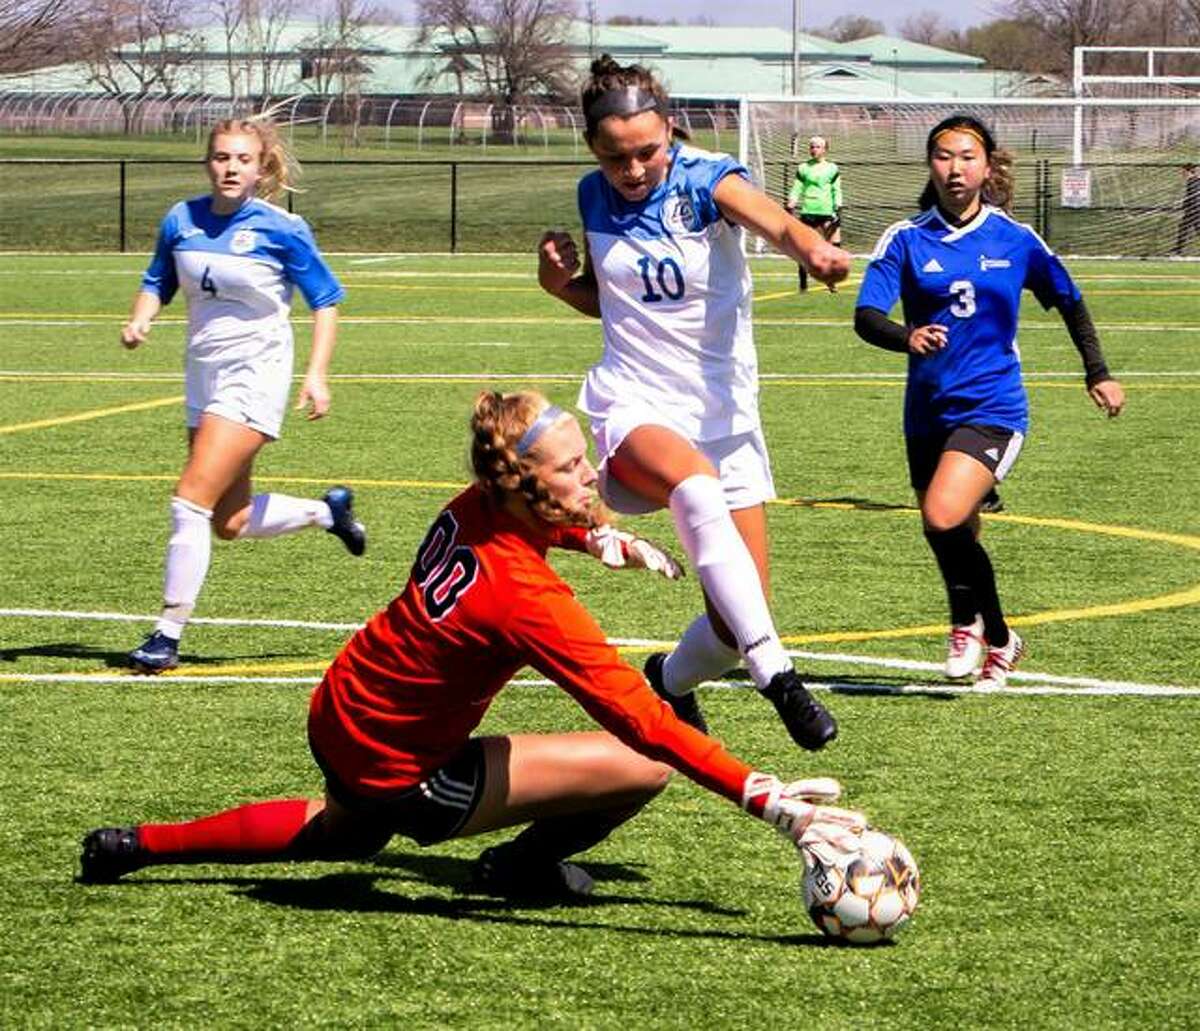 Lewis and Clark’s Grace Osvath (10) pressures Eastern Florida State College goalie Marce Thedinga earlier this season at Gordon Moore Park. Osvath was one of five LCCC players named to the All-Region 24 team. Others included Skylar Hollinsghead, Ava Walls, Paige Bauer and goalie Ally Cheeley. LCCC coach Tim Rooney was named Coach of the Year in the region as well.